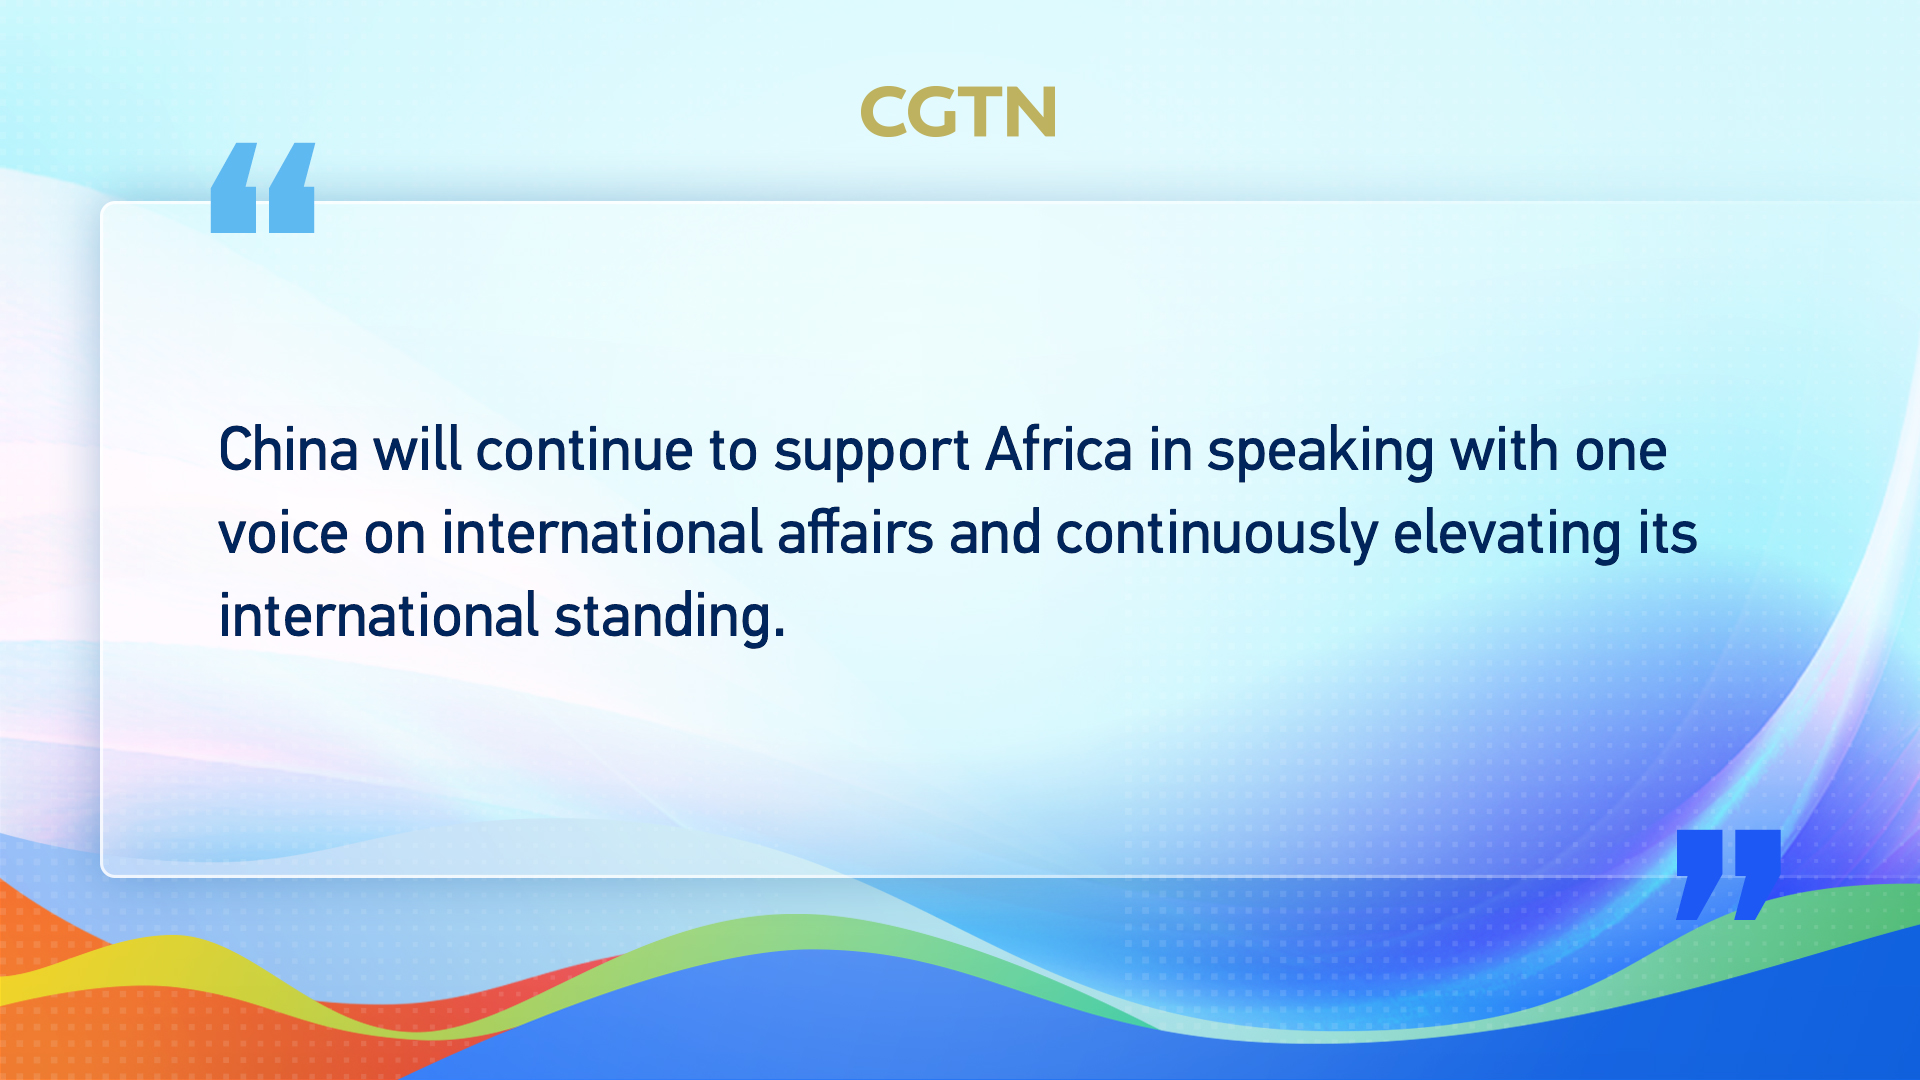 Xi Jinping's key quotes at China-Africa Leaders' Dialogue